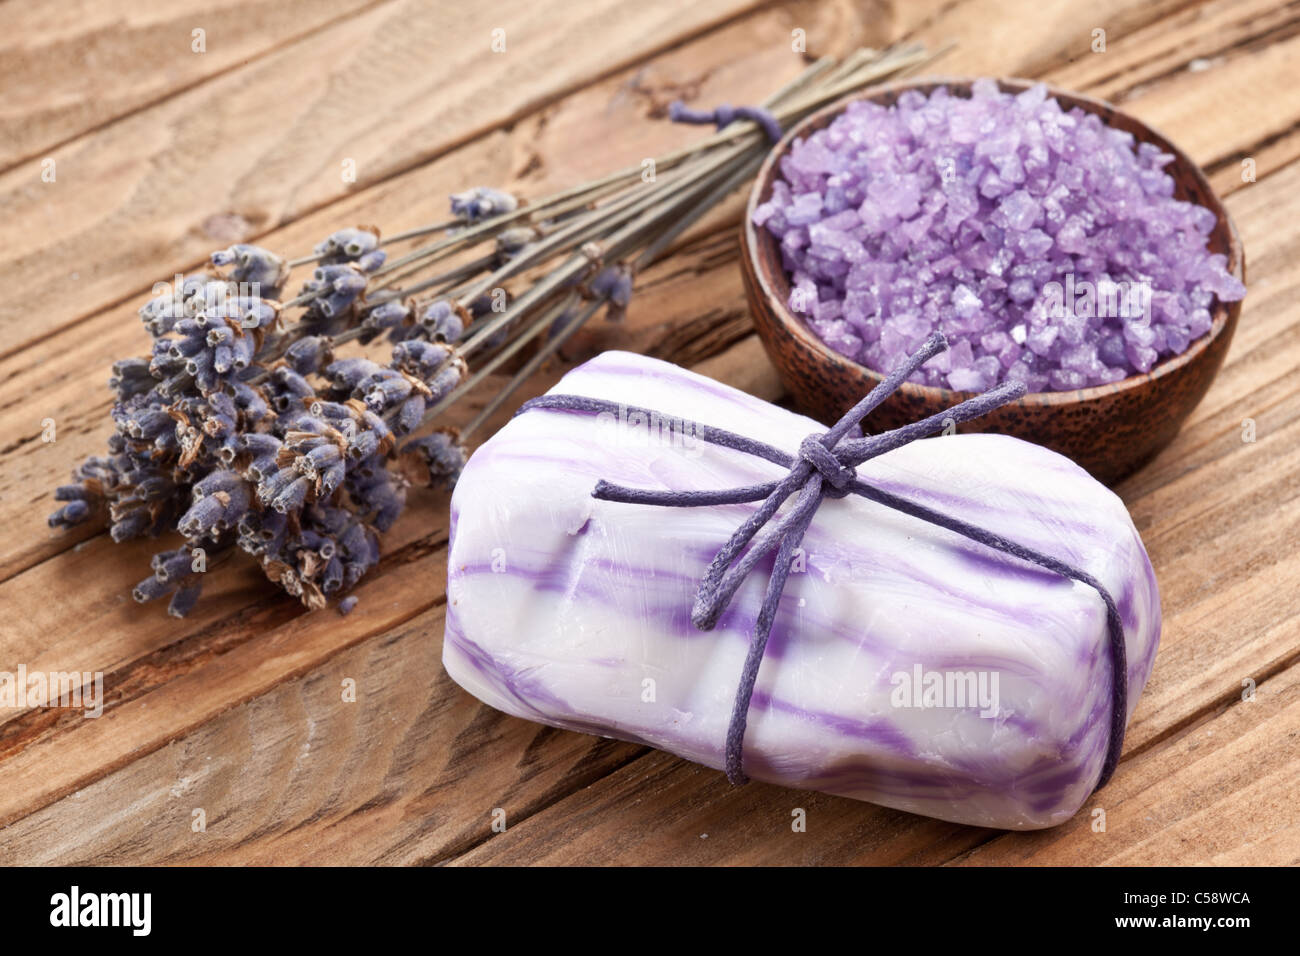 Soap with sea-salt and dried lavender on wood desk. Stock Photo